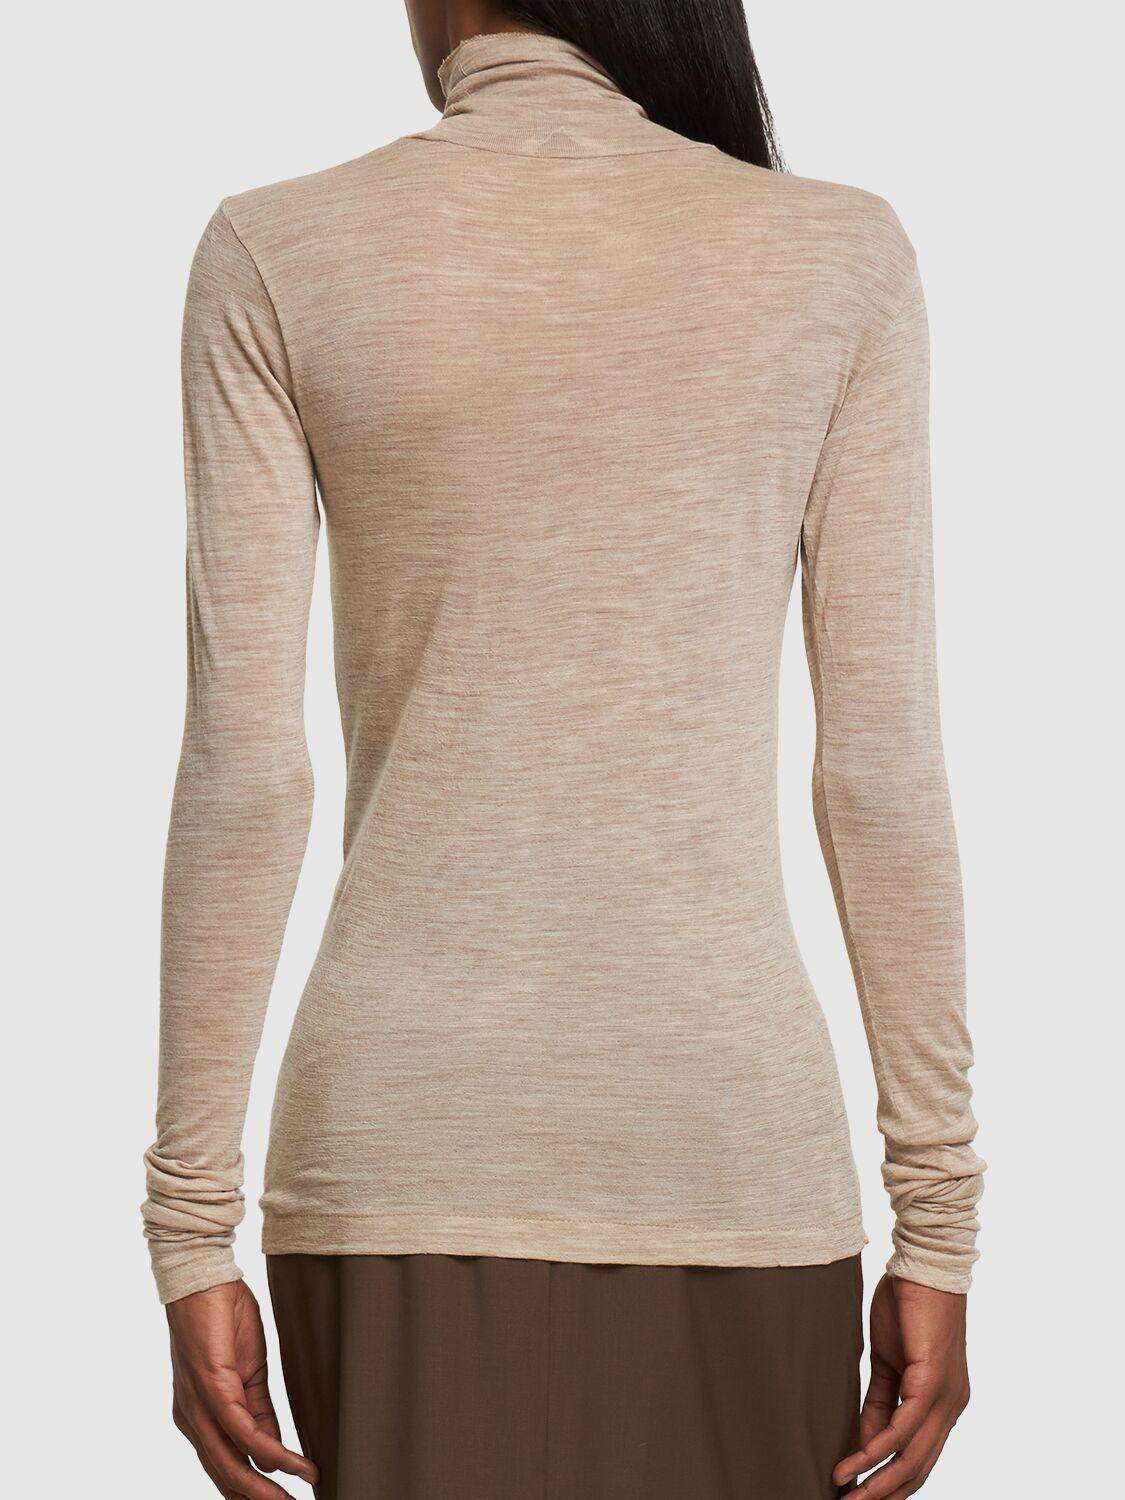 AURALEE Super Soft Sheer Wool Jersey Top in Natural | Lyst